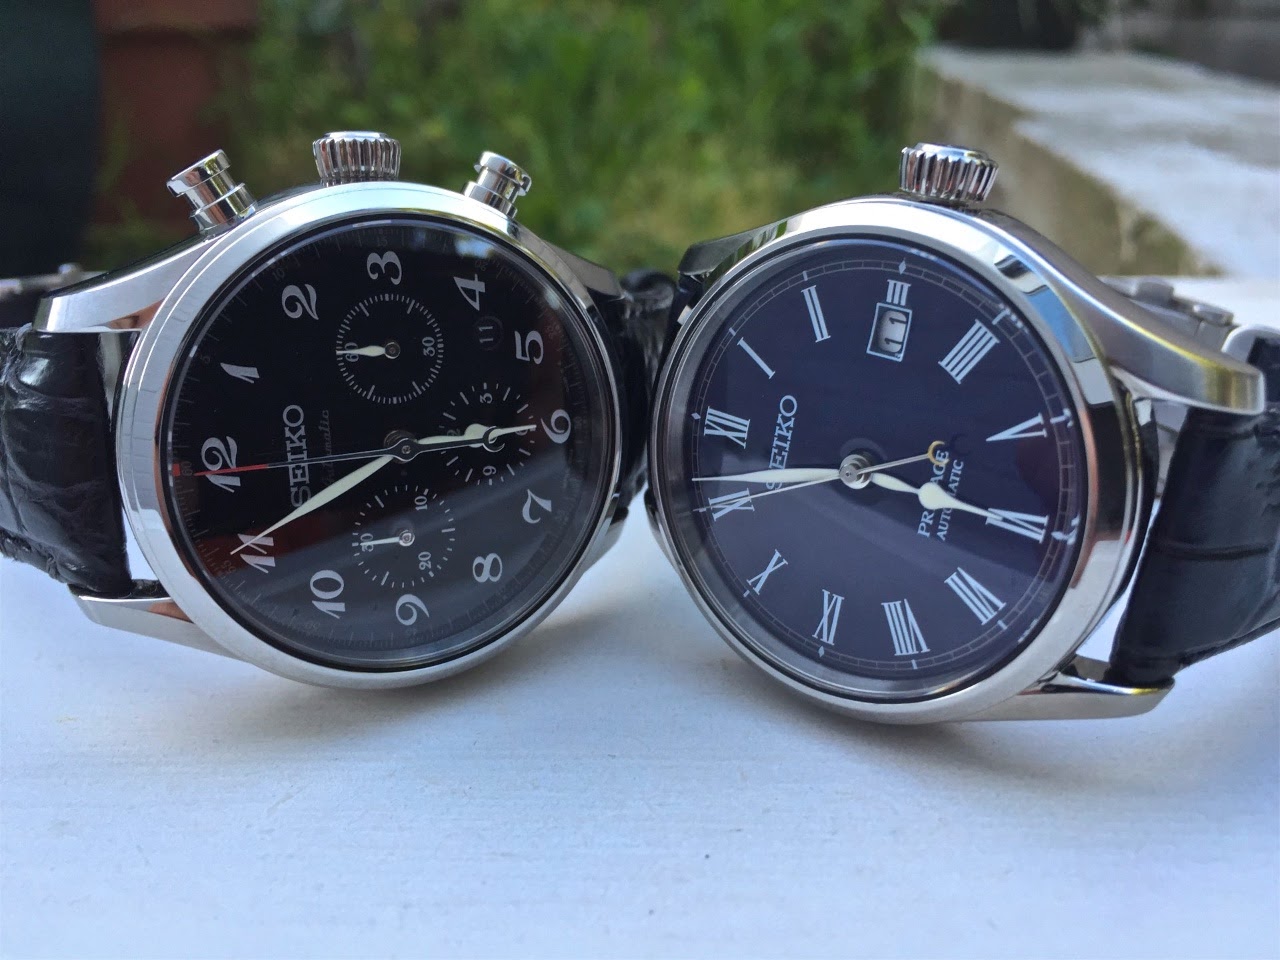 Seiko - Which of these two Presage do you prefer, and why?